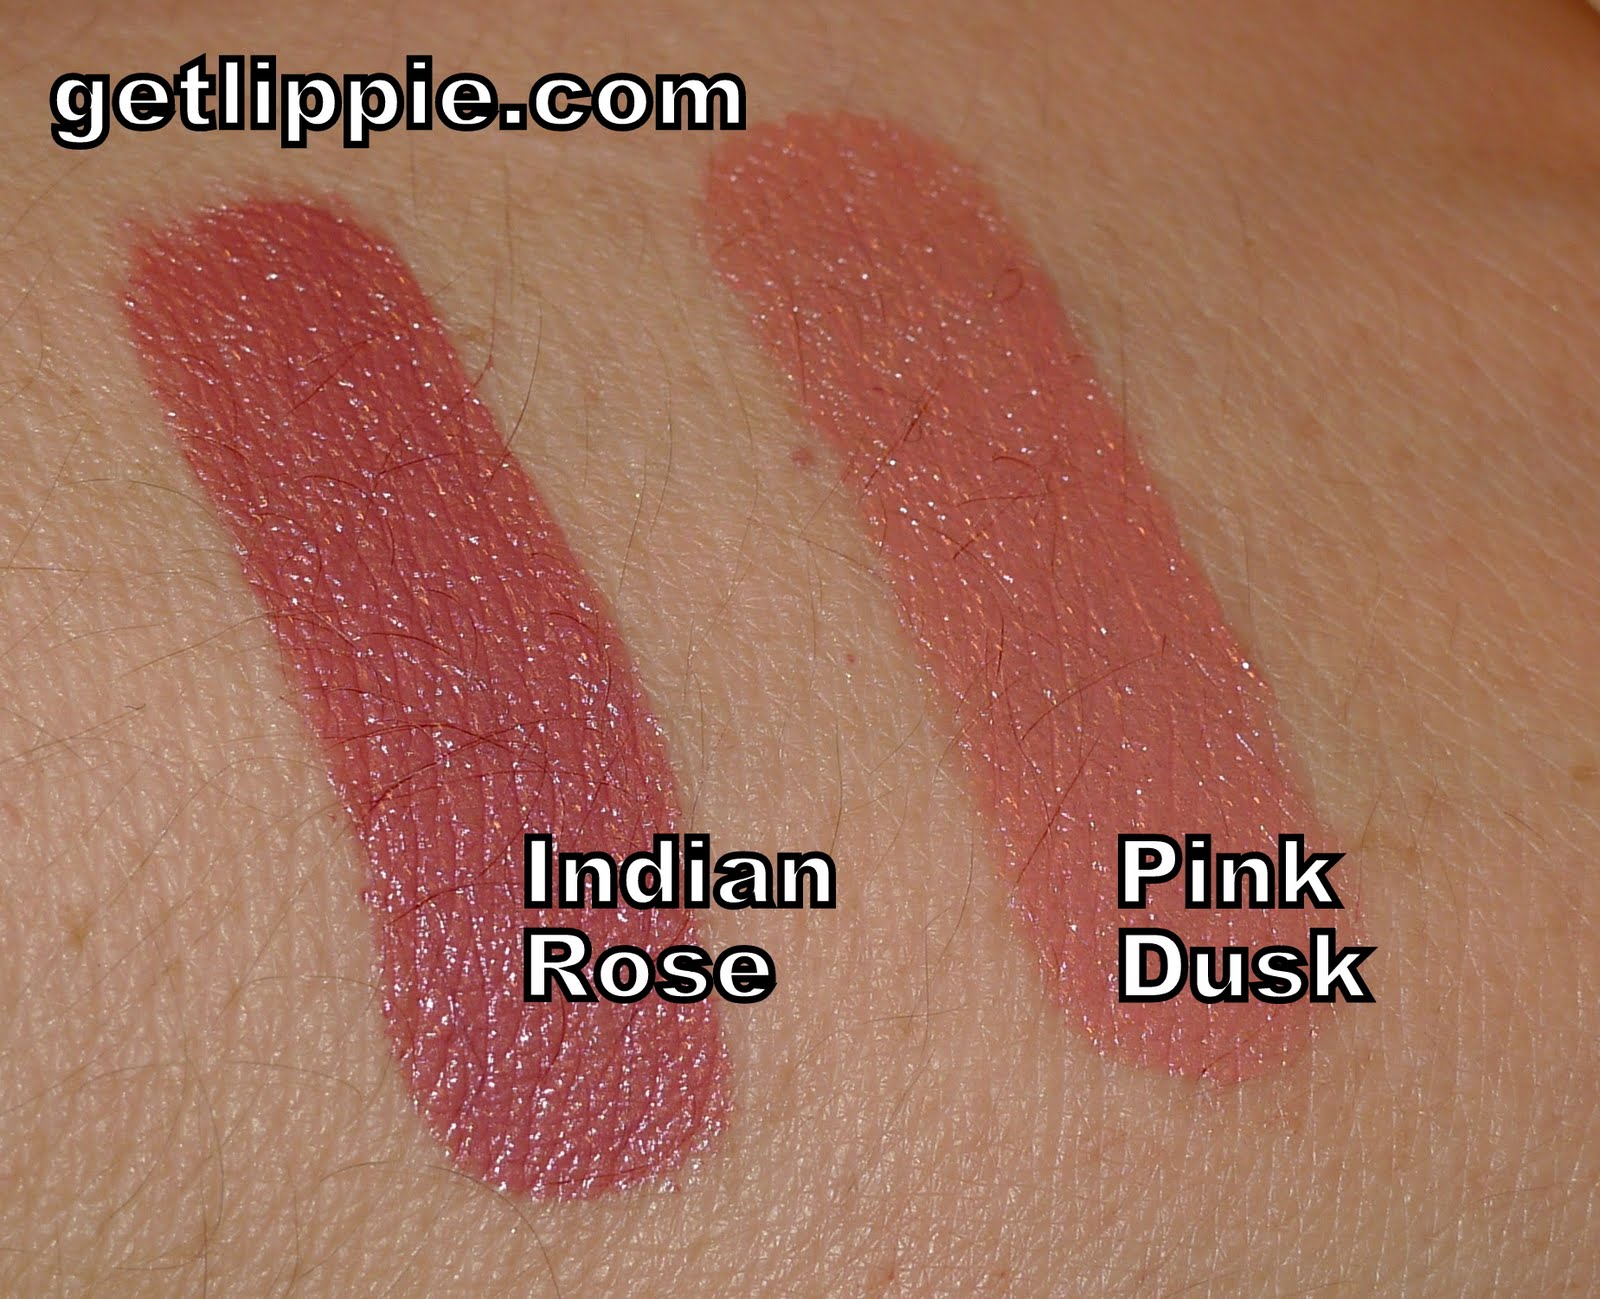 Tom Ford Indian Rose Lipstick - Swatches & - Lippie